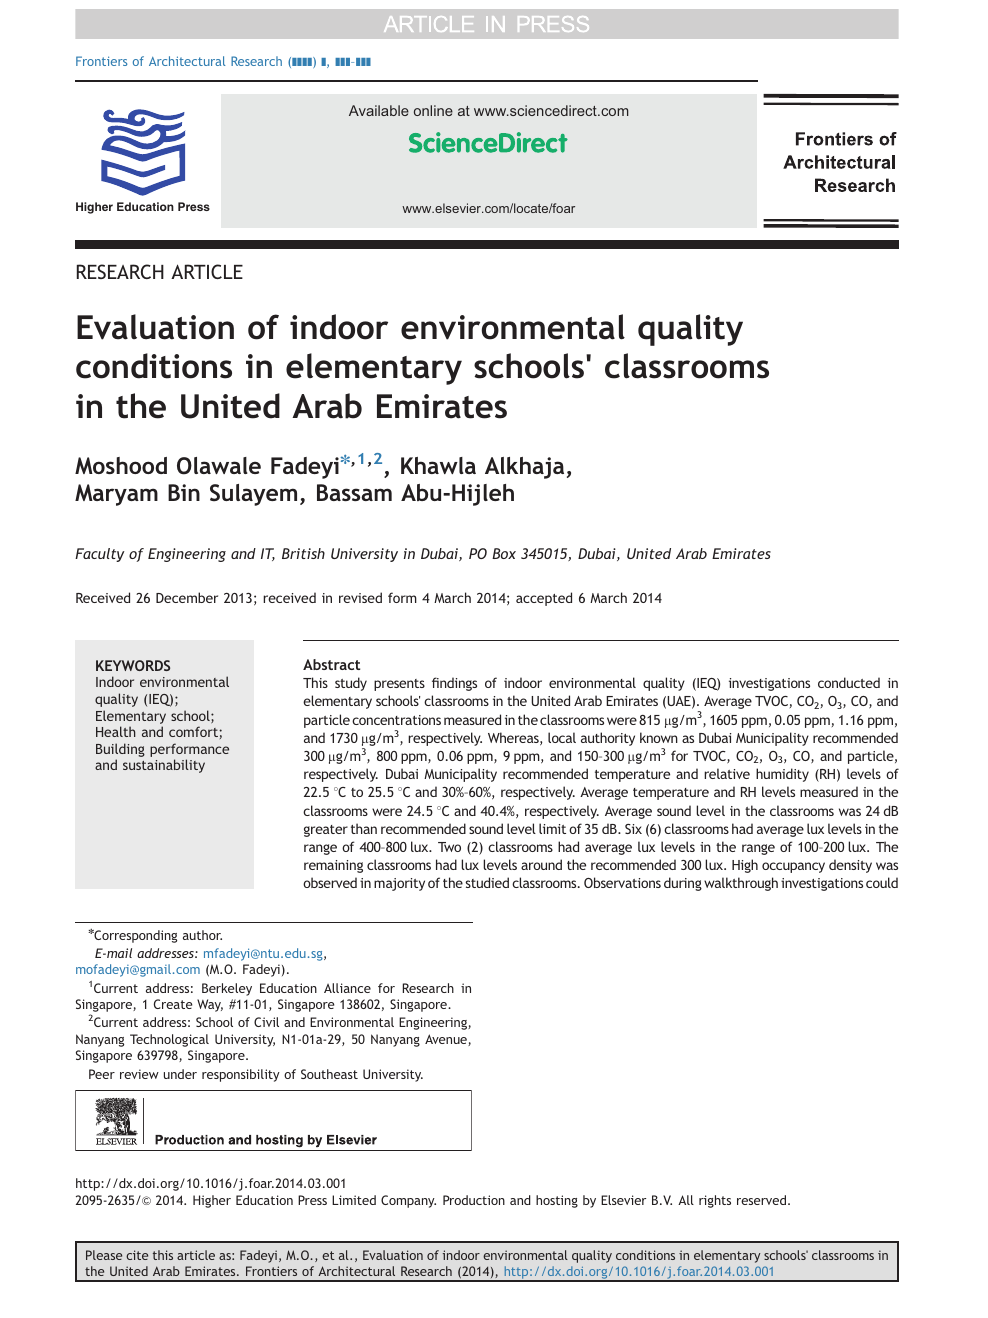 Evaluation Of Indoor Environmental Quality Conditions In Elementary Schools Classrooms In The United Arab Emirates Topic Of Research Paper In Earth And Related Environmental Sciences Download Scholarly Article Pdf And Read